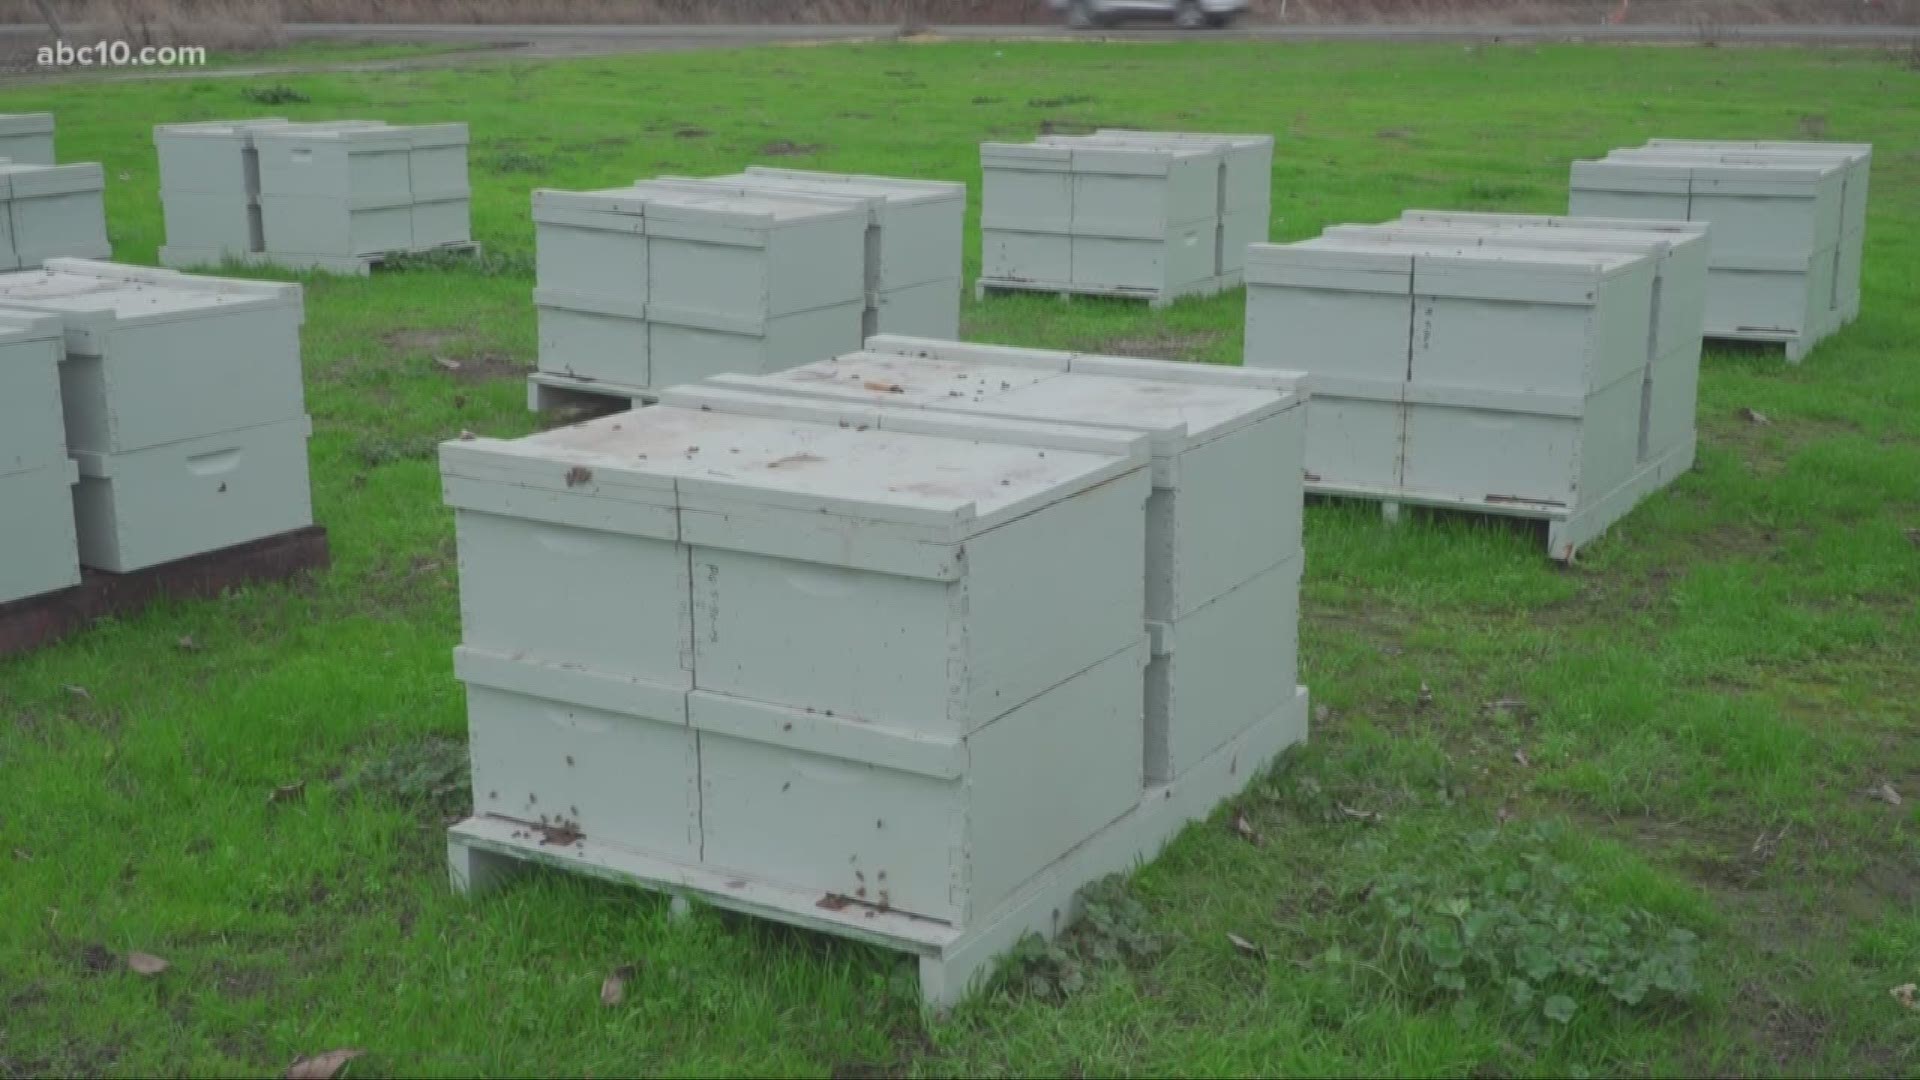 Beekeeper Mike Potts said 92 beehives were stolen from his honey farm.